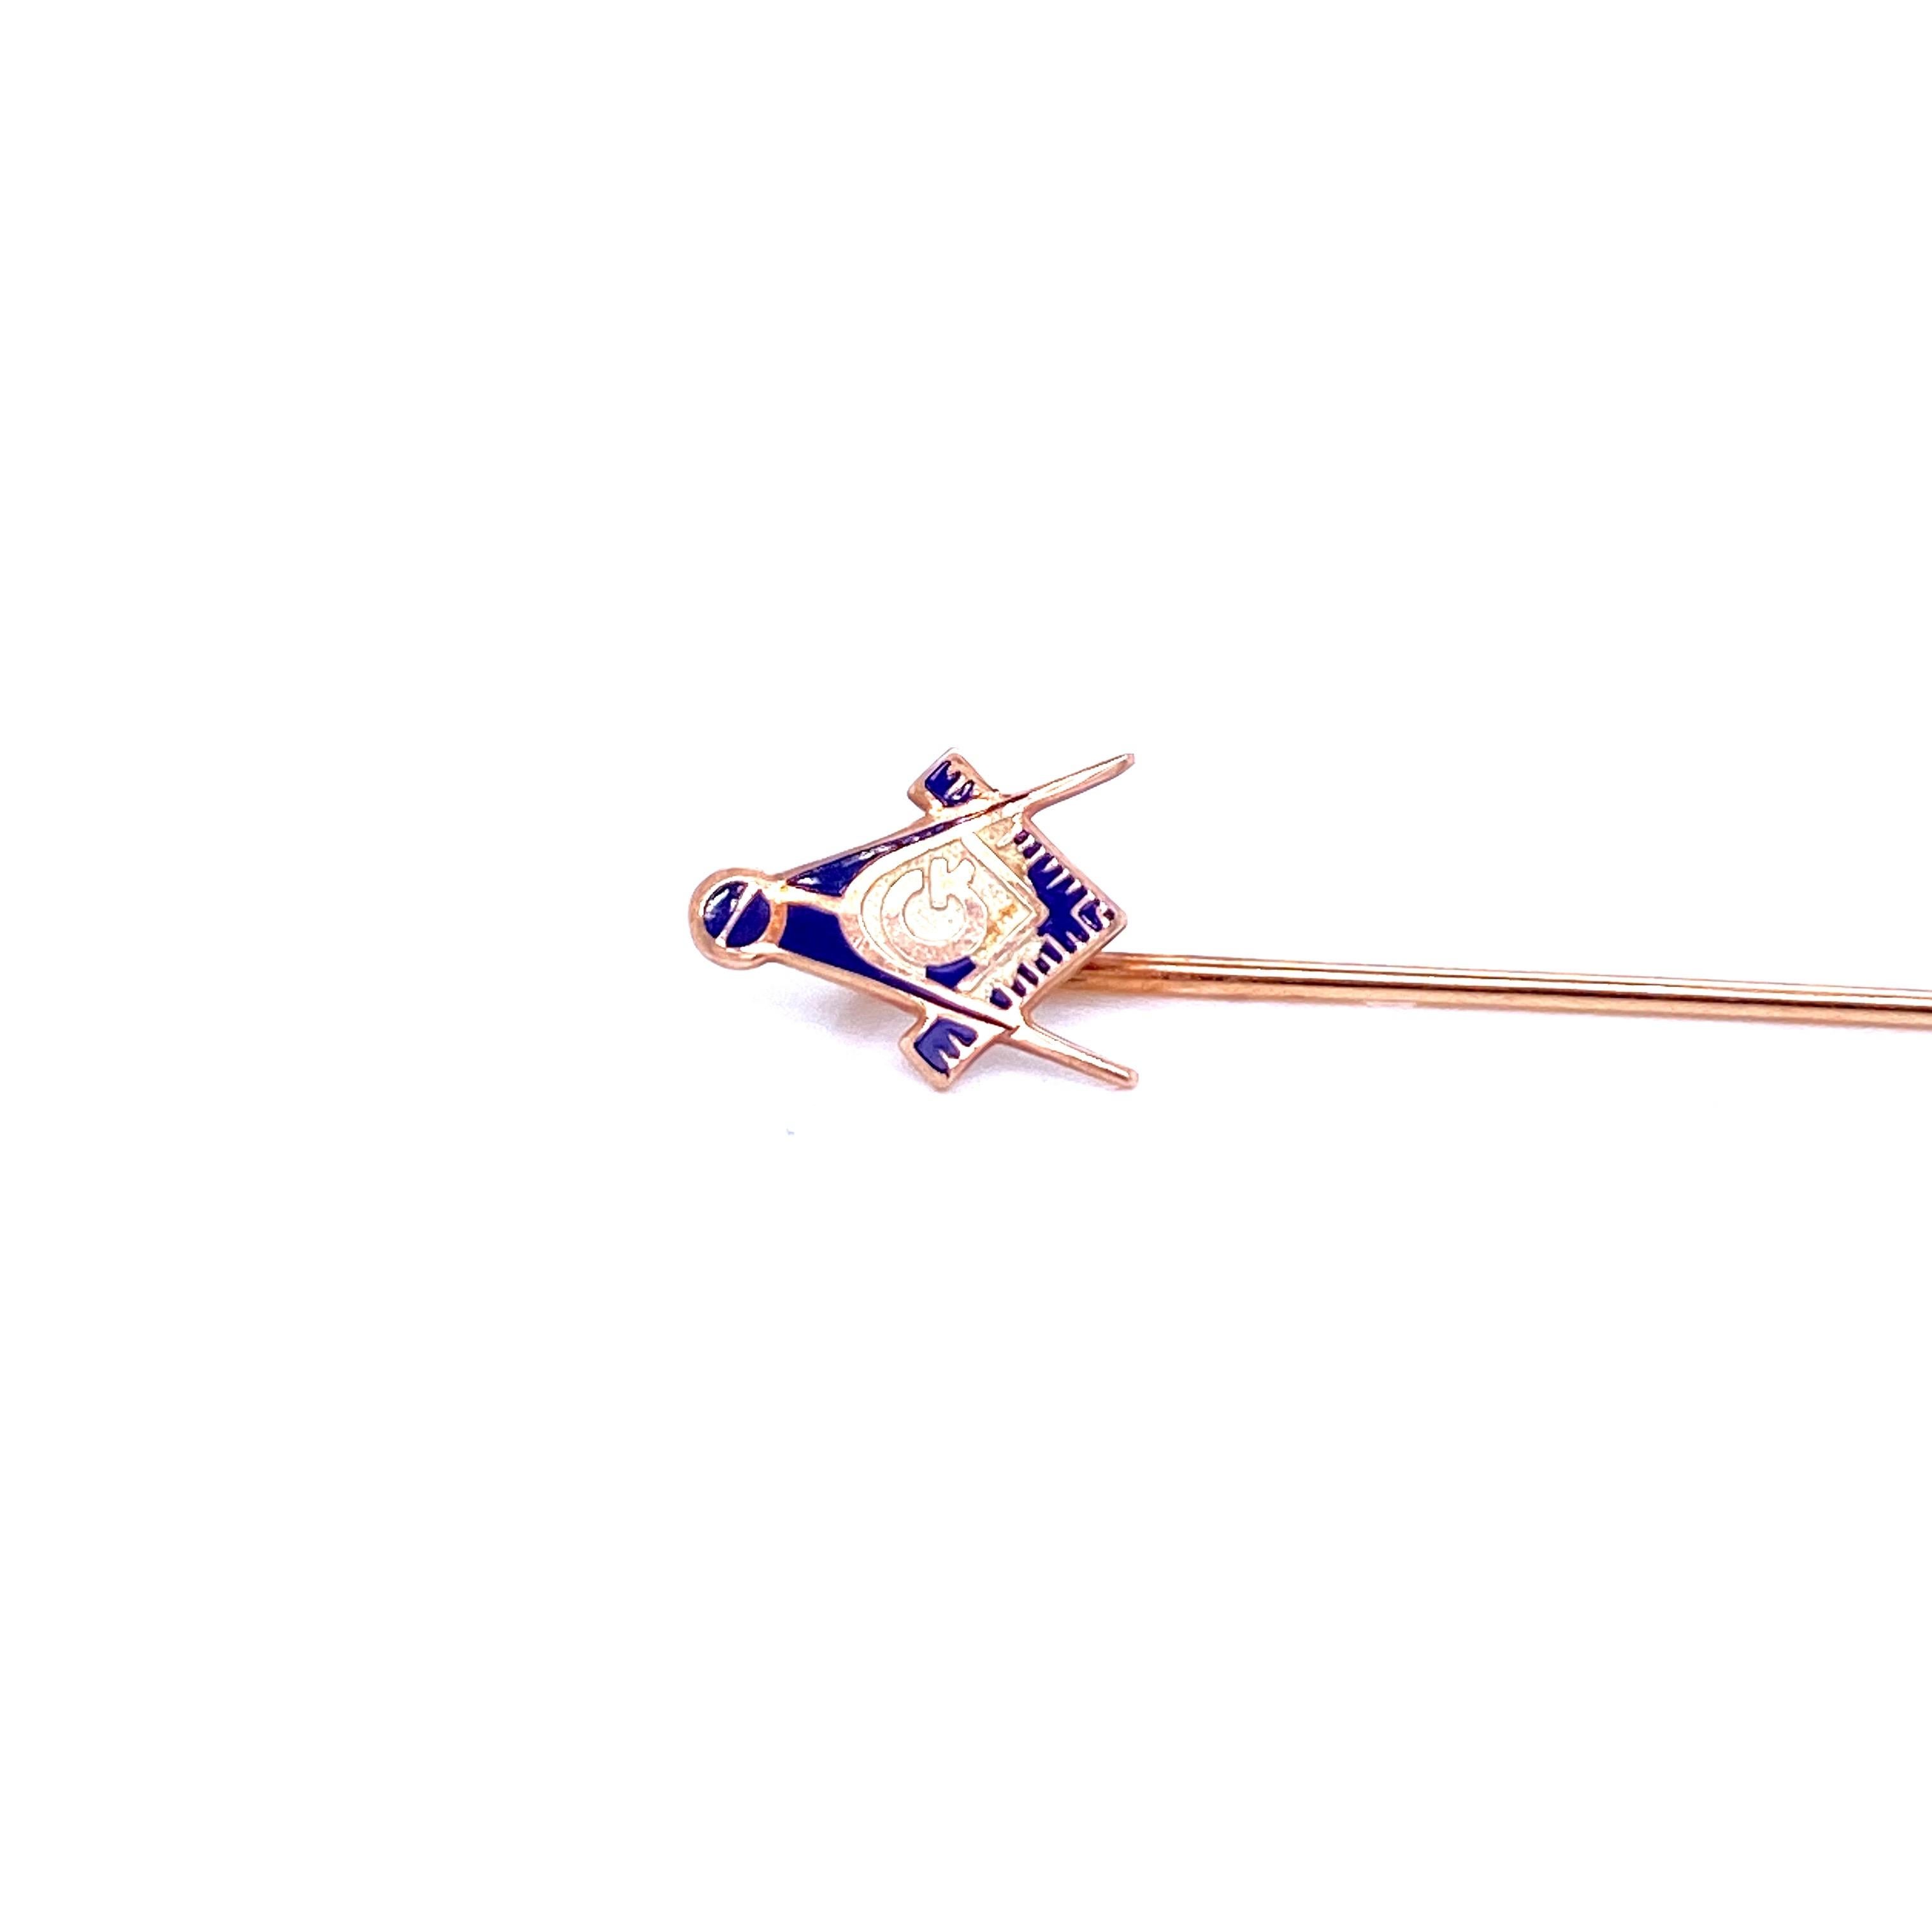 Nice authentic Freemasonry Antique Gold Pin.

It features the Freemason symbol of the square and compass adorned with enchanting blue enamel.

The jewel is 5,6 cm (2,20 in) long

CONDITION: Pre-owned - Excellent 10/10
METAL: 18k Gold
DESIGN ERA: